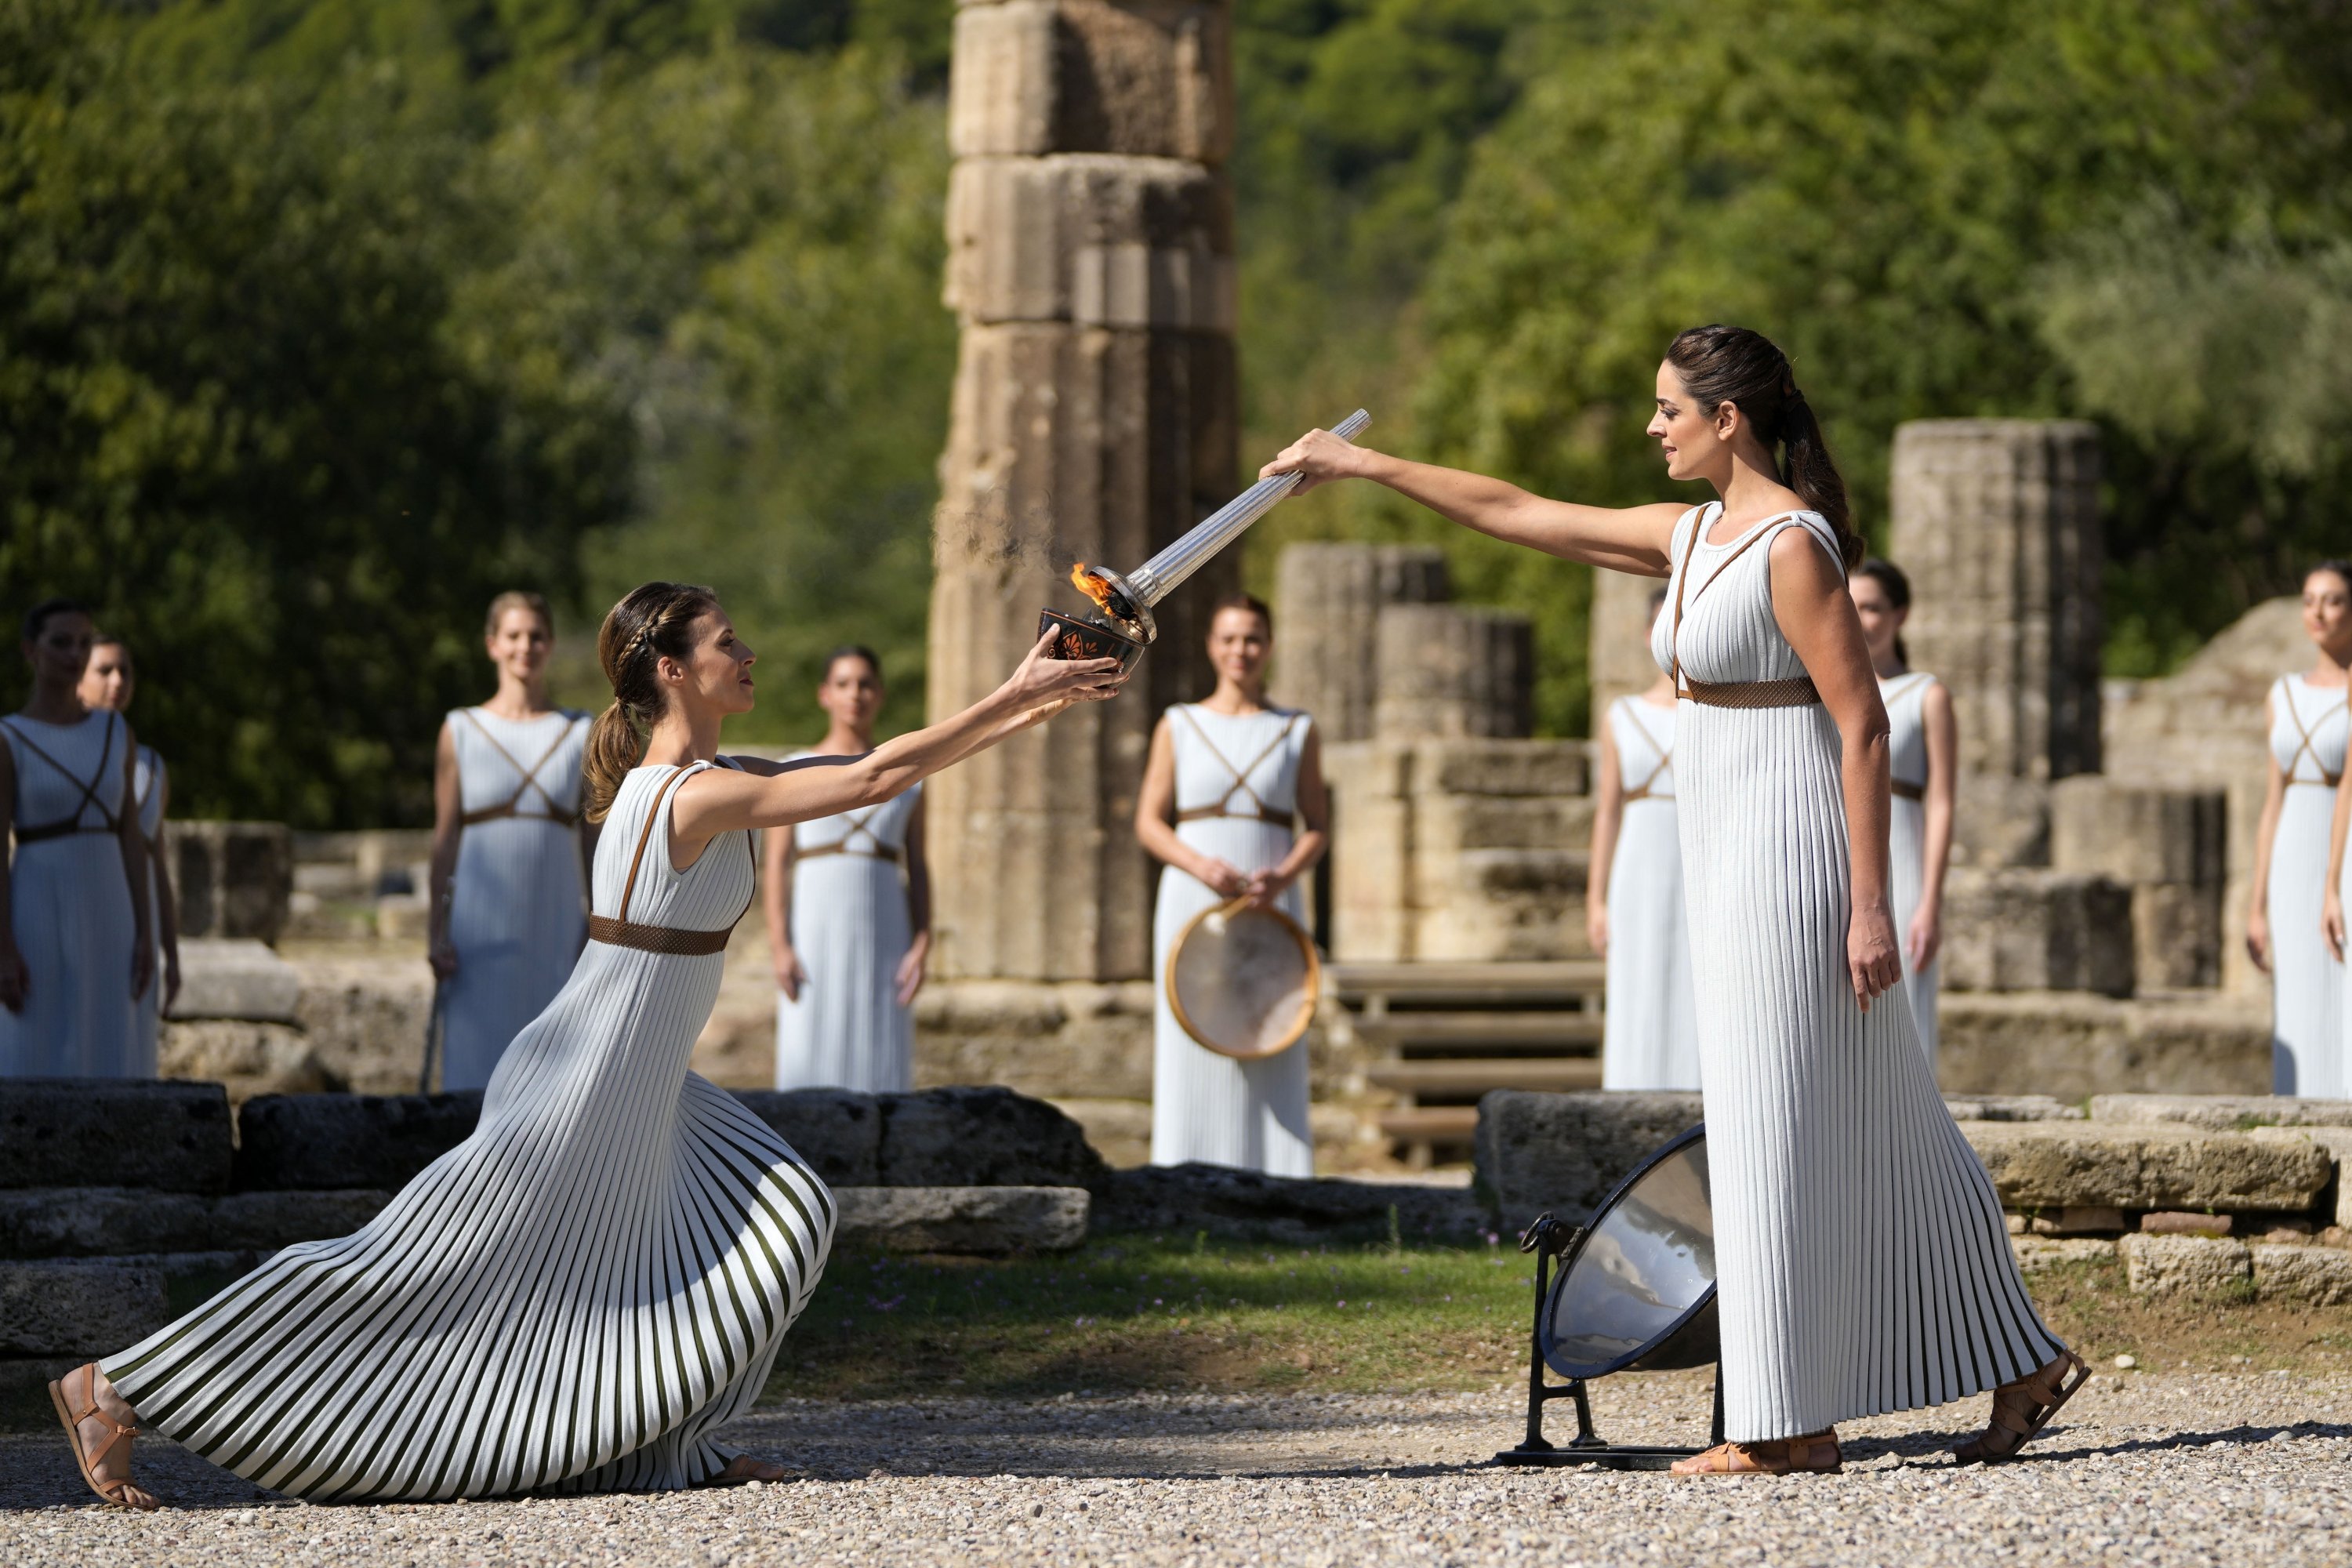 Greek actress Xanthi Georgiou (R) playing the role of the high priestess, holds the torch during the lighting of the Olympic flame at Ancient Olympia site, birthplace of the ancient Olympics in southwestern Greece, Oct. 18, 2021. (AP Photo)